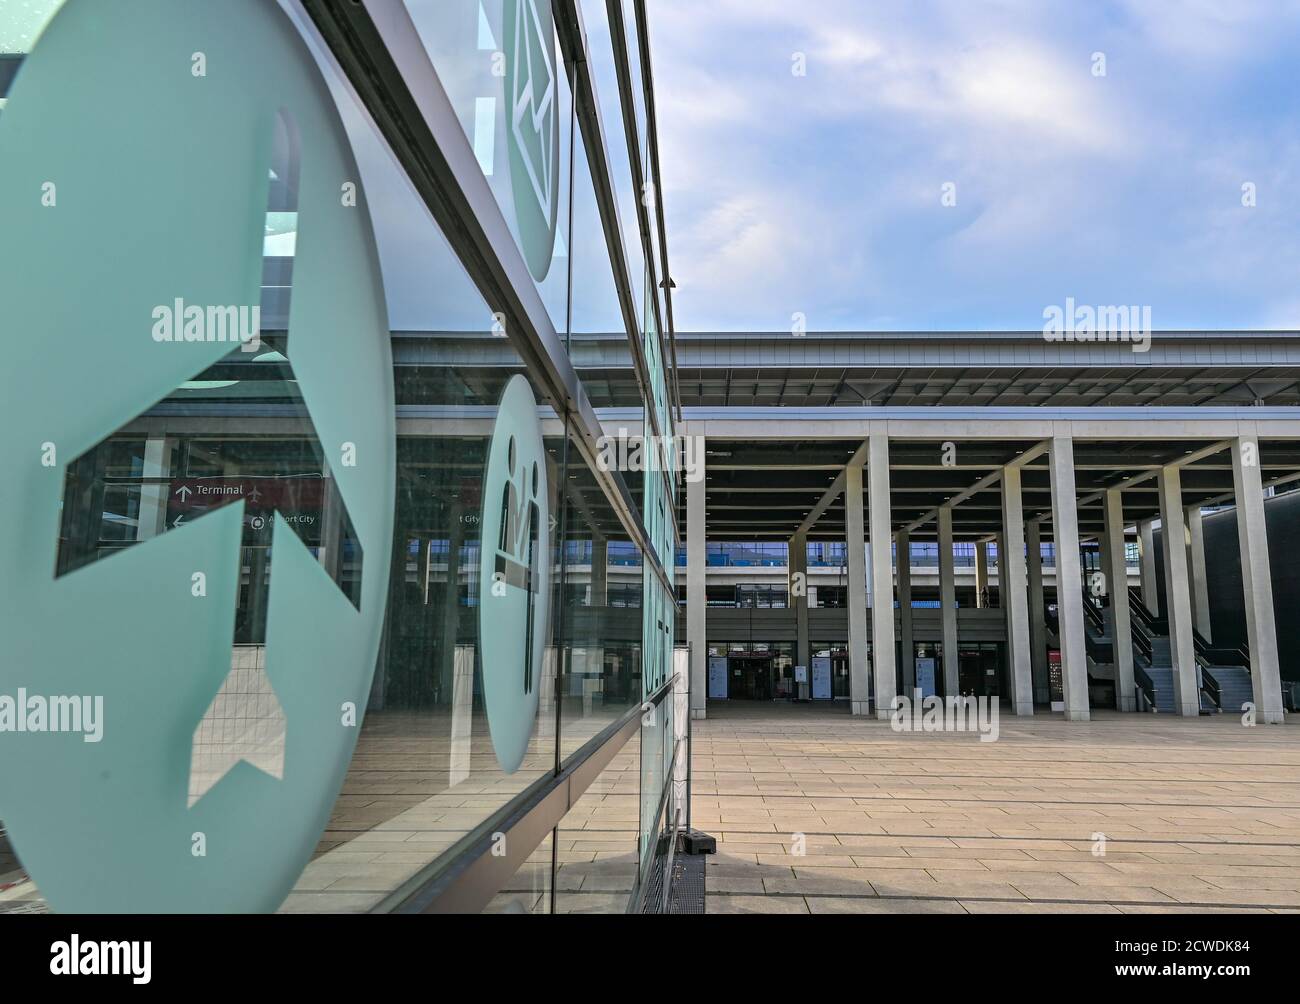 29 September 2020, Brandenburg, Schönefeld: View of the main terminal of the airport Berlin Brandenburg 'Willy Brandt' (BER). The capital airport BER at the border to Berlin is planned to open on 31.10.2020. Photo: Patrick Pleul/dpa-Zentralbild/dpa Stock Photo